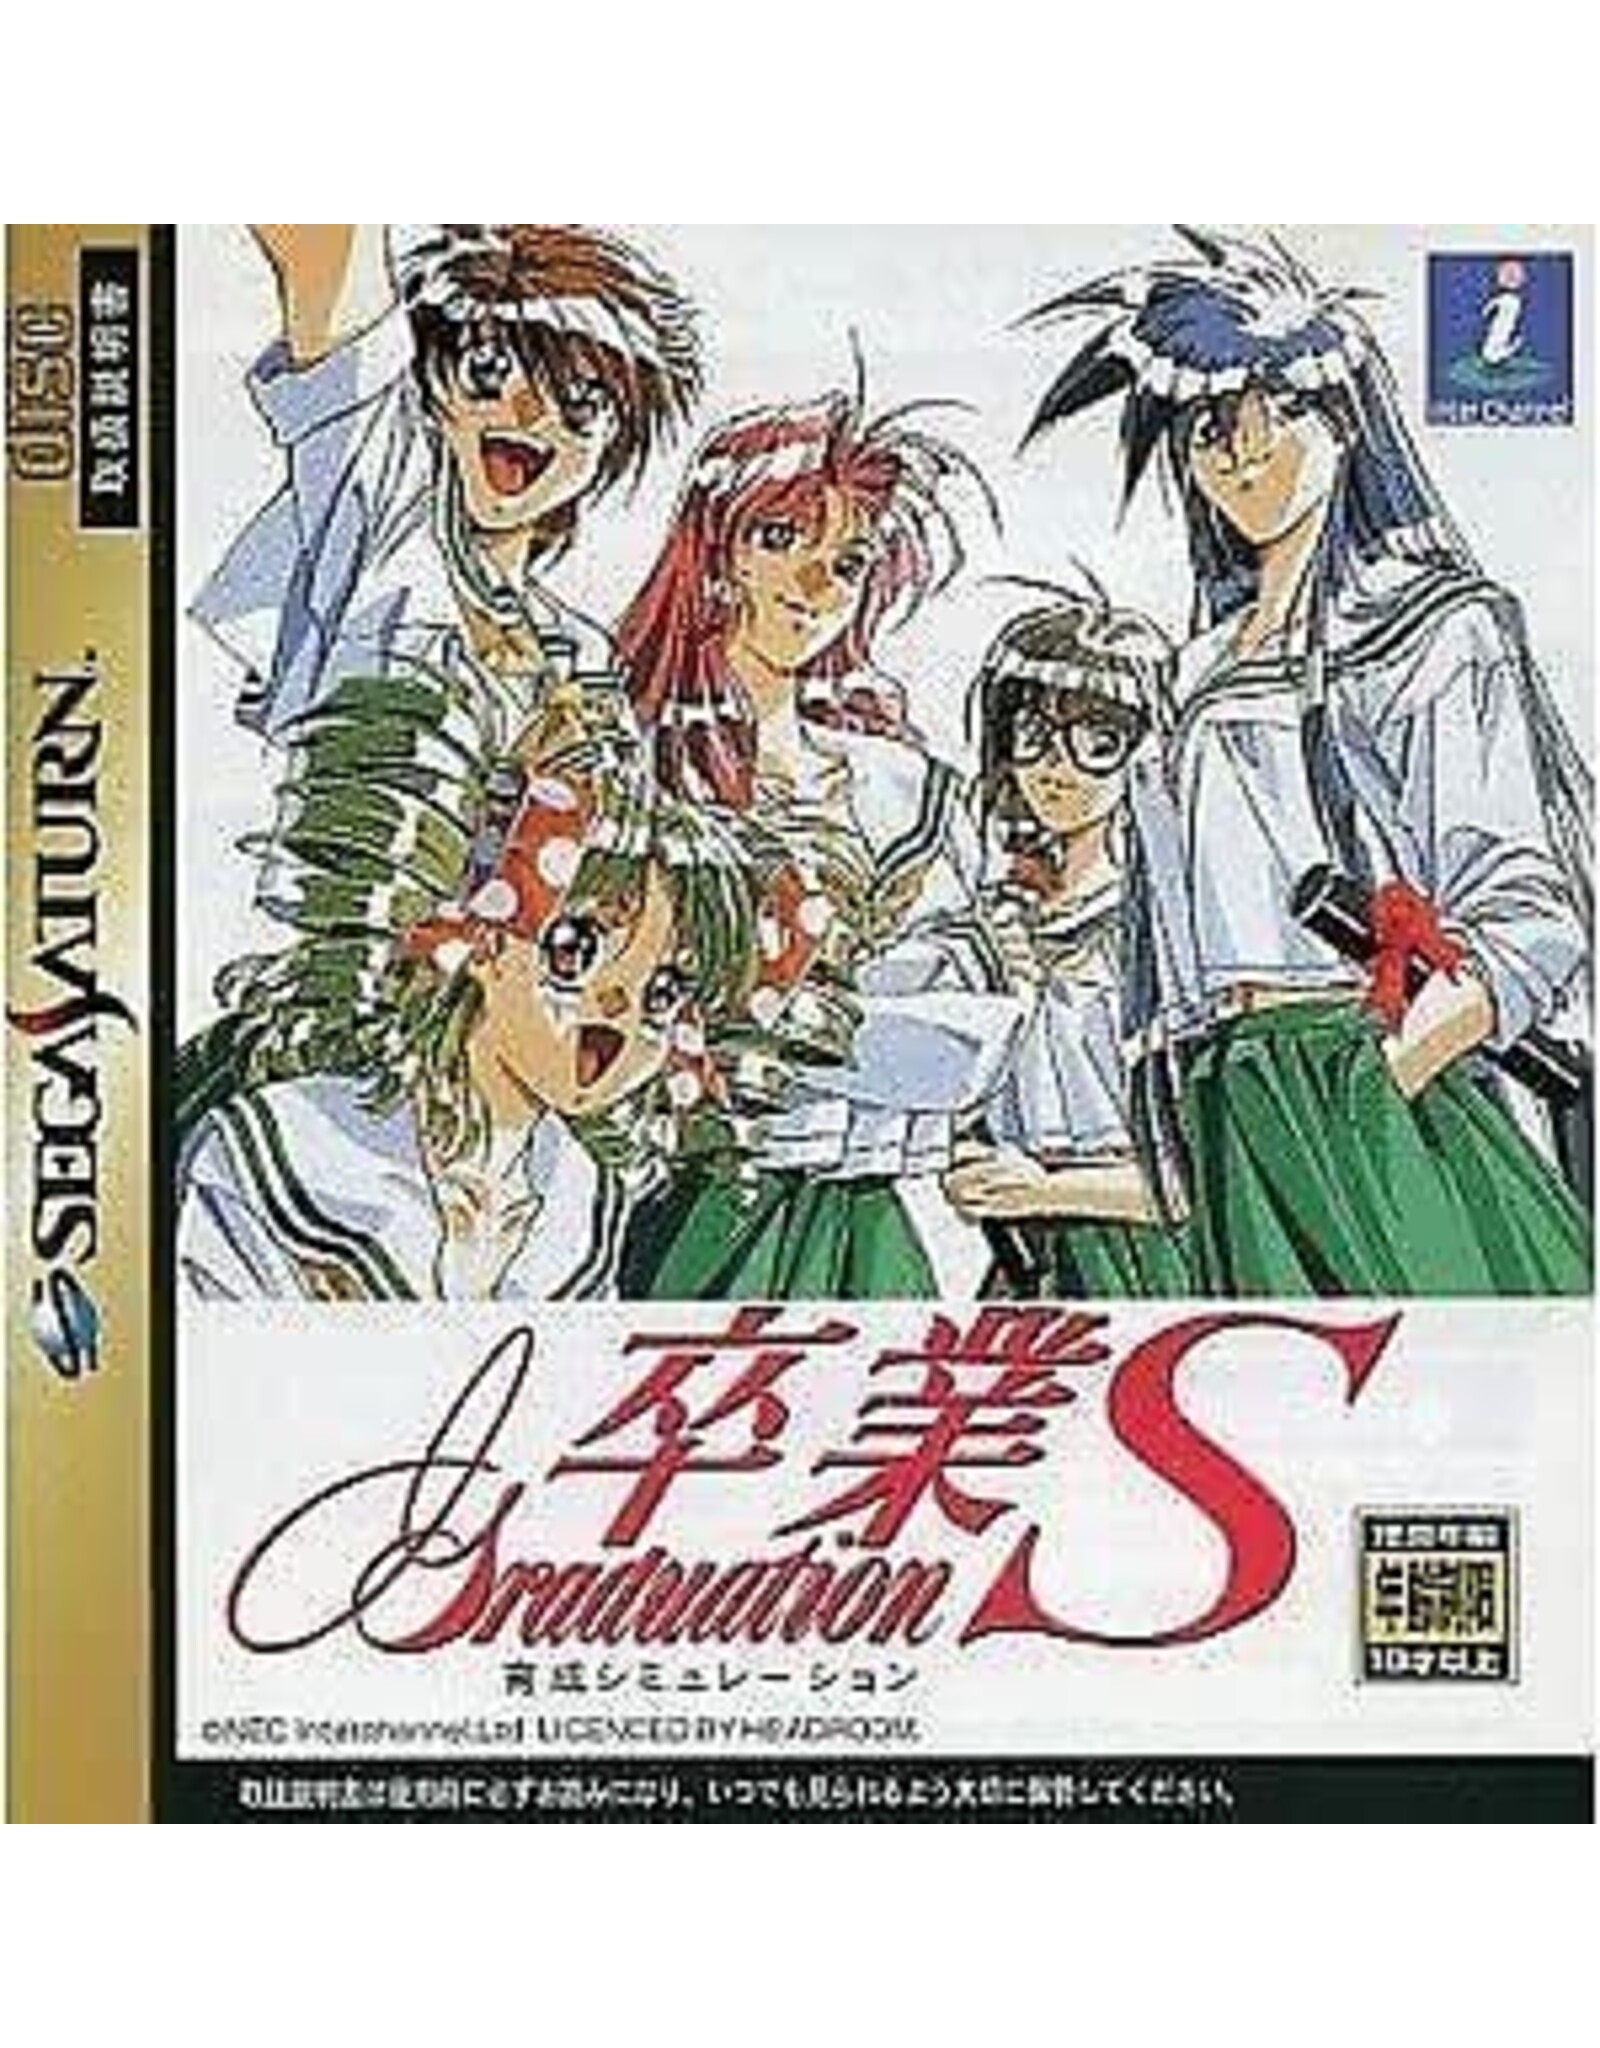 Sega Saturn Sotsugyo S Graduation Limited Box (Game, Manual, and Outer Box Only; JP Import)